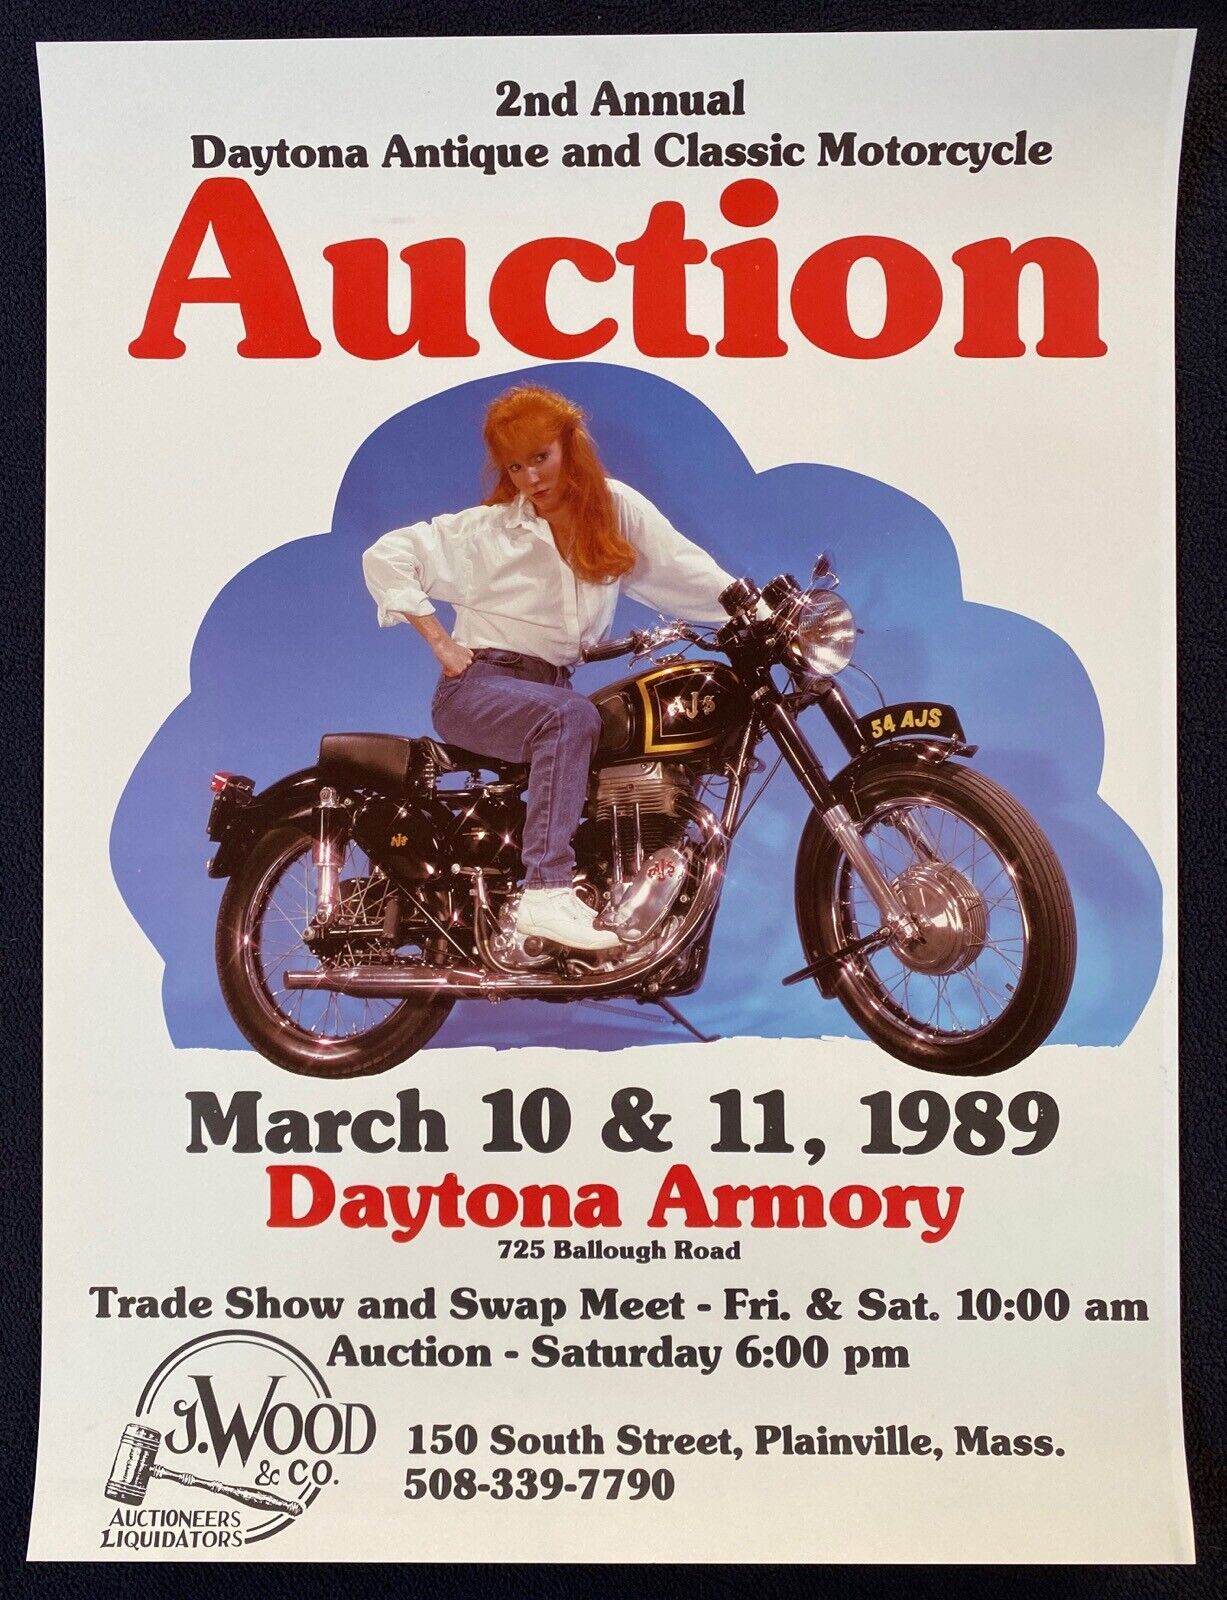 1989 Daytona Antique & Classic Motorcycle Auction Poster 1954 AJS Model 16